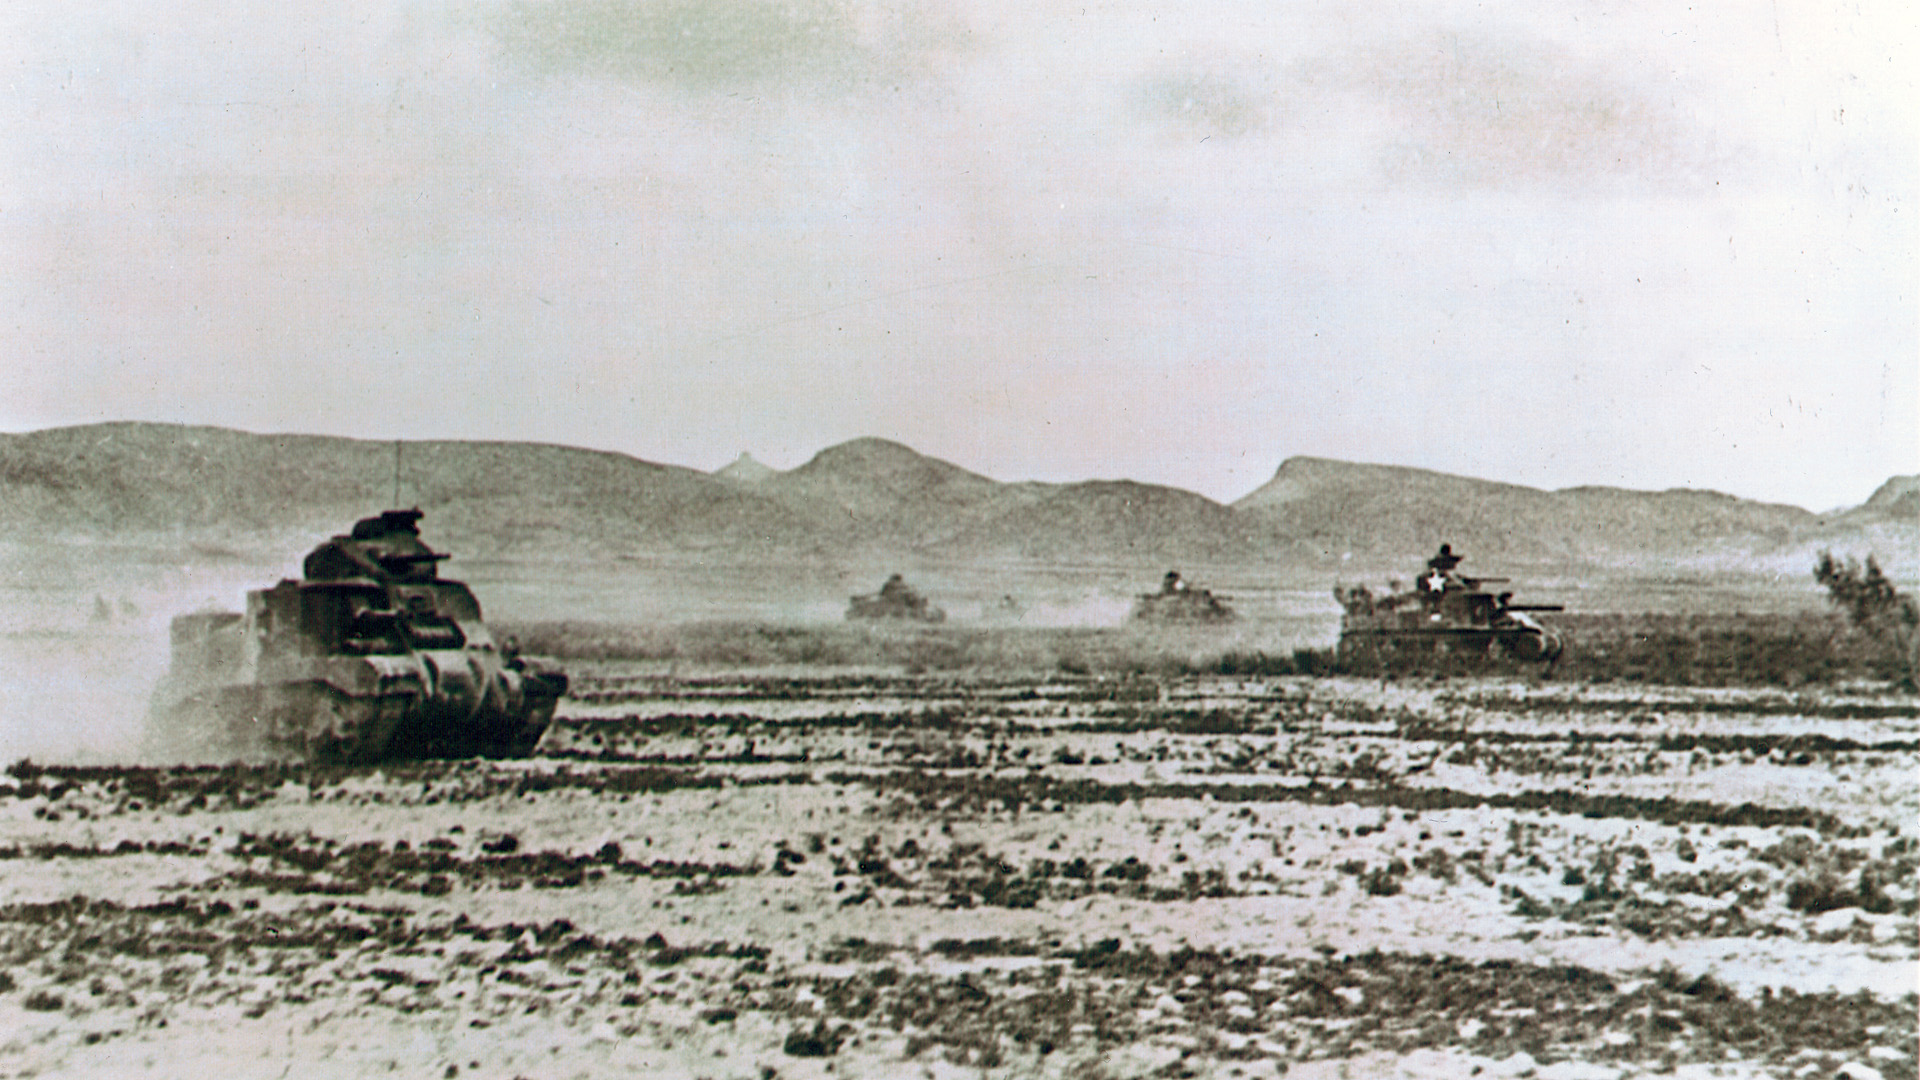 American M3 Lee tanks, with hull-mounted 75mm canon and 37mm guns in turrets above, raise clouds of dust as they race across the Tunisian desert.